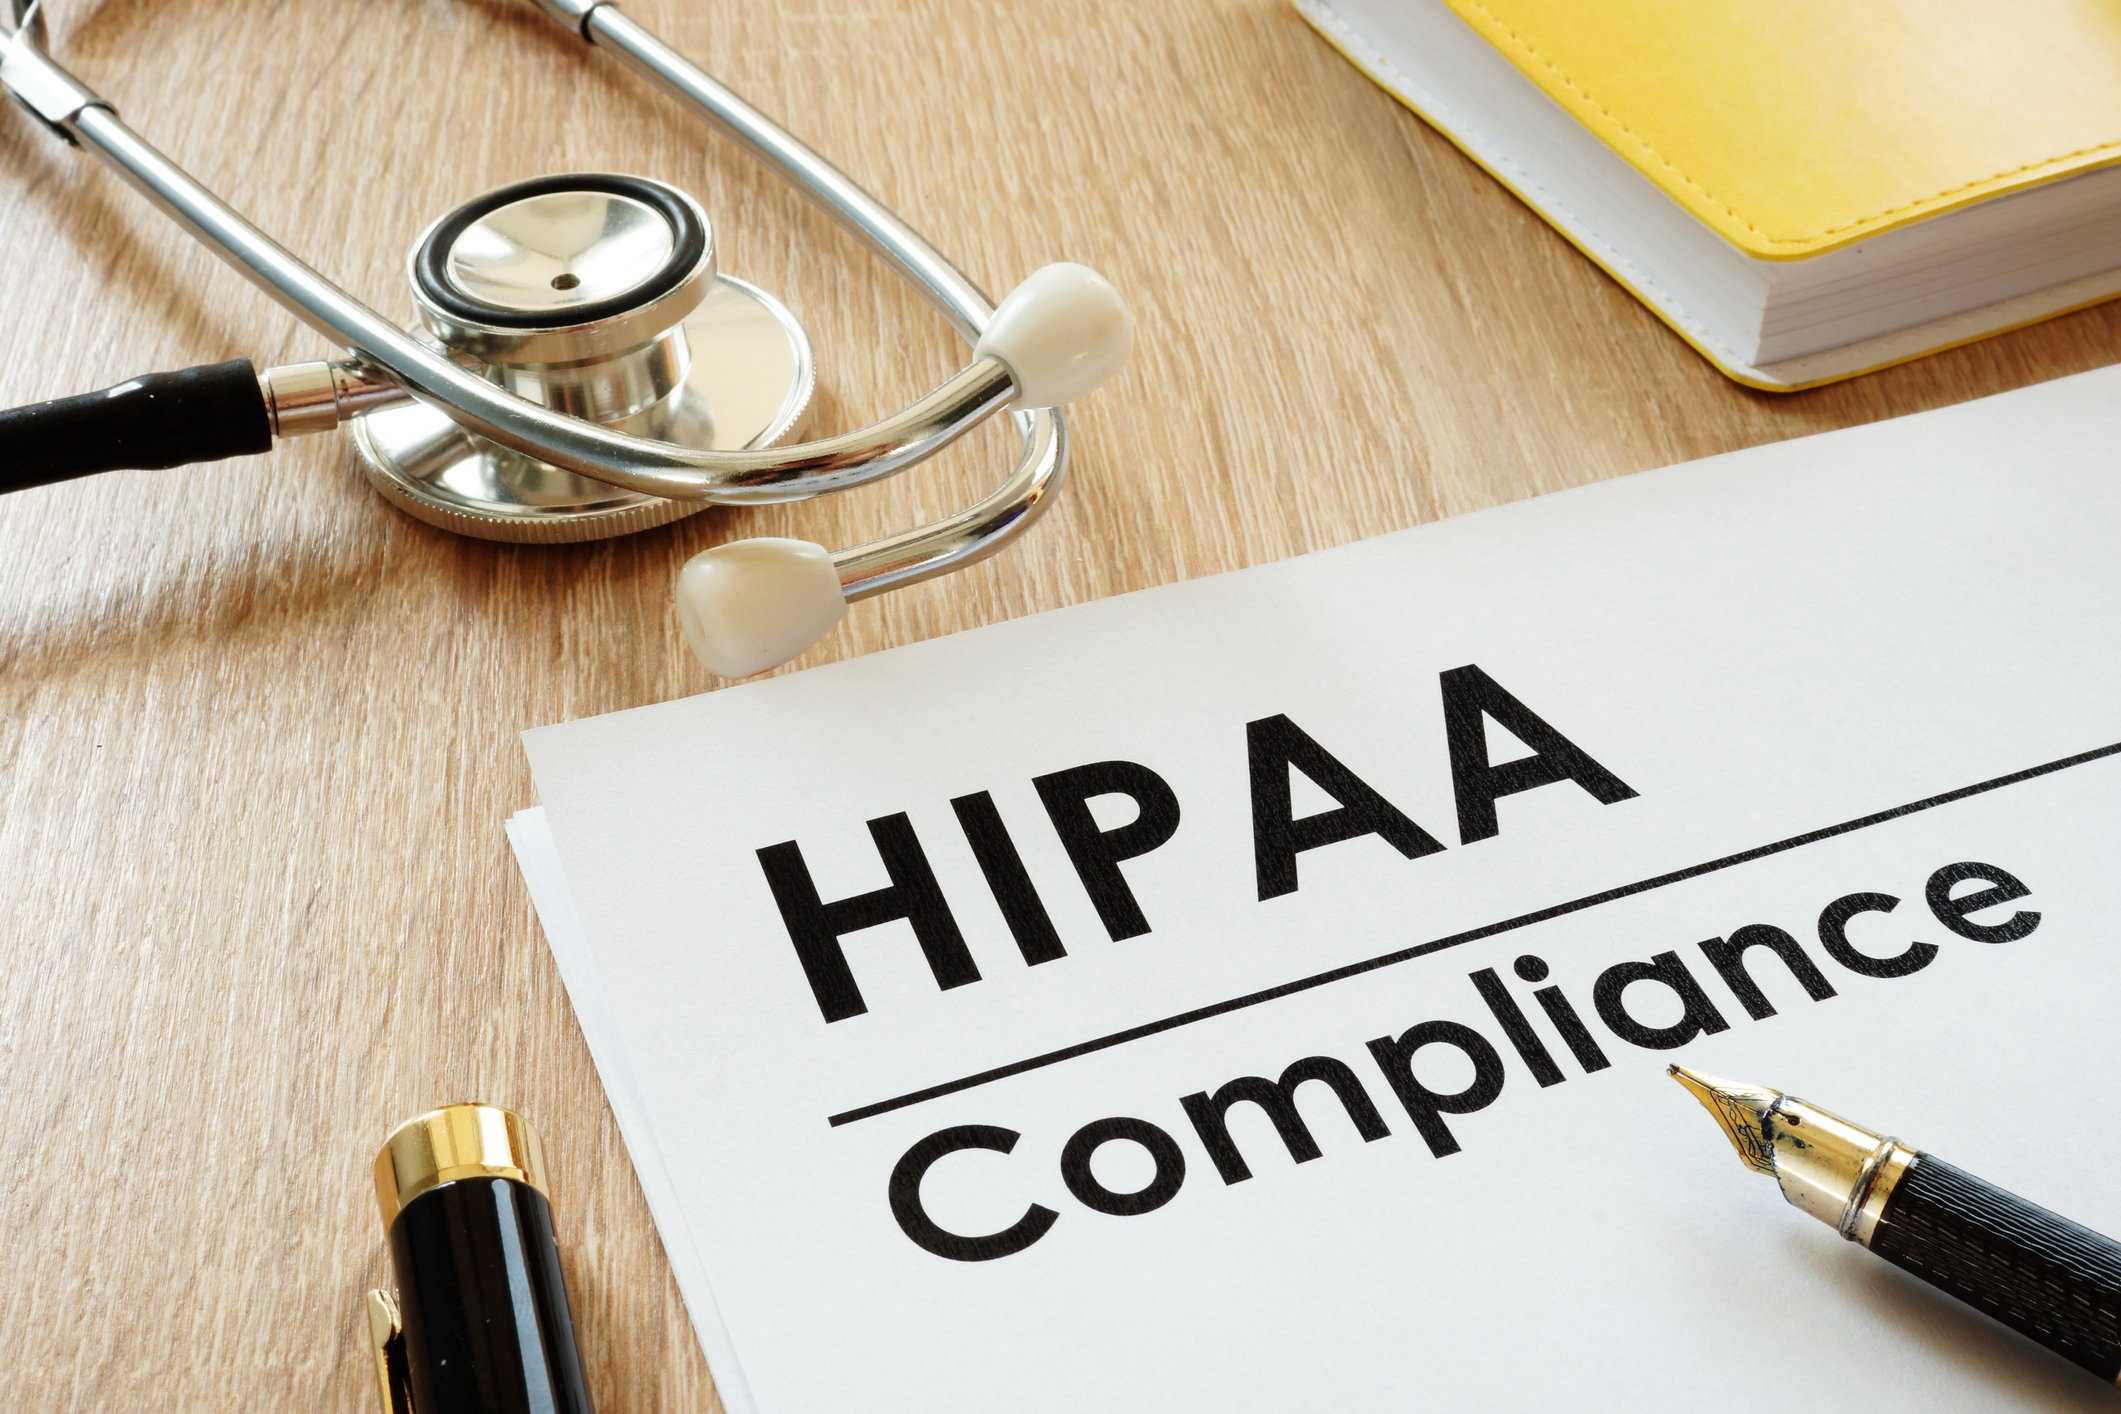 When it comes to adopting the recent changes for X12 Version 5010 for HIPAA transactions, there are key differences to learn.